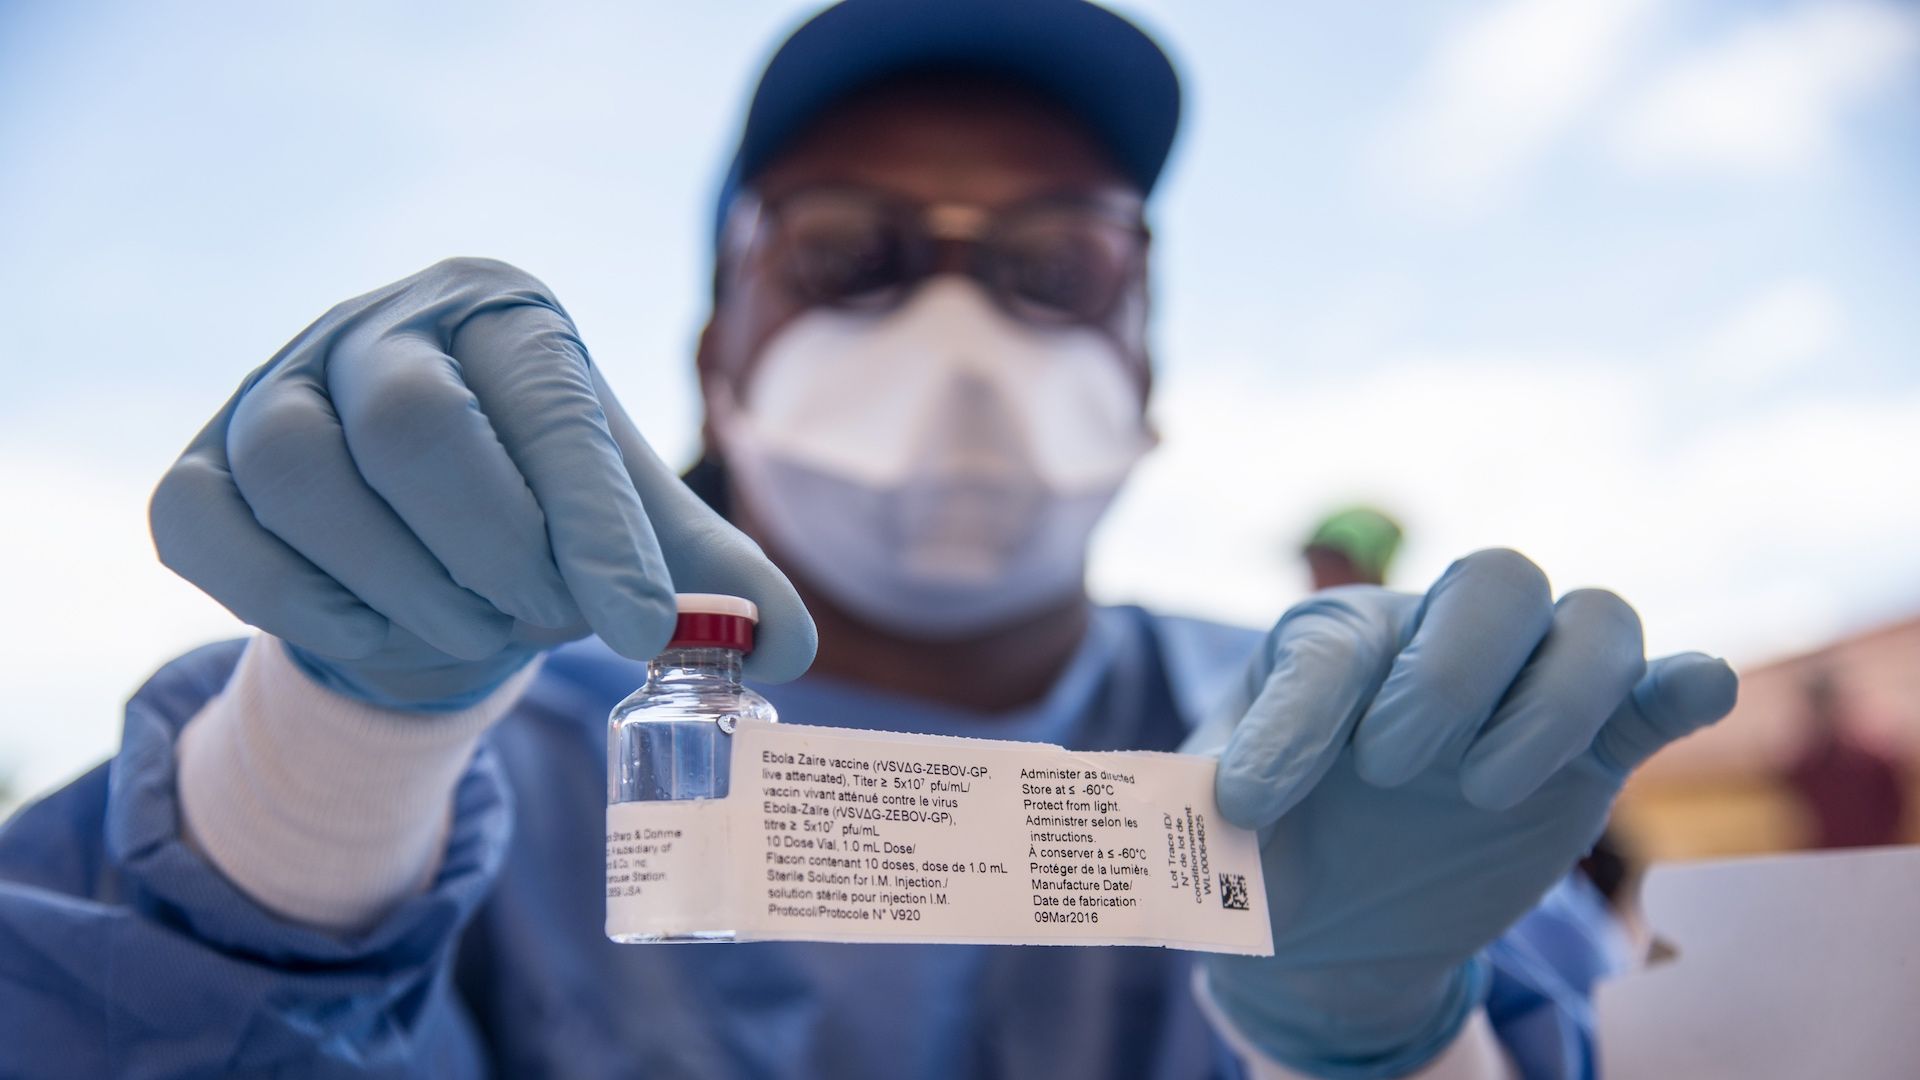 Health care worker in the DRC holds a vial of the experimental Ebola virus vaccine.